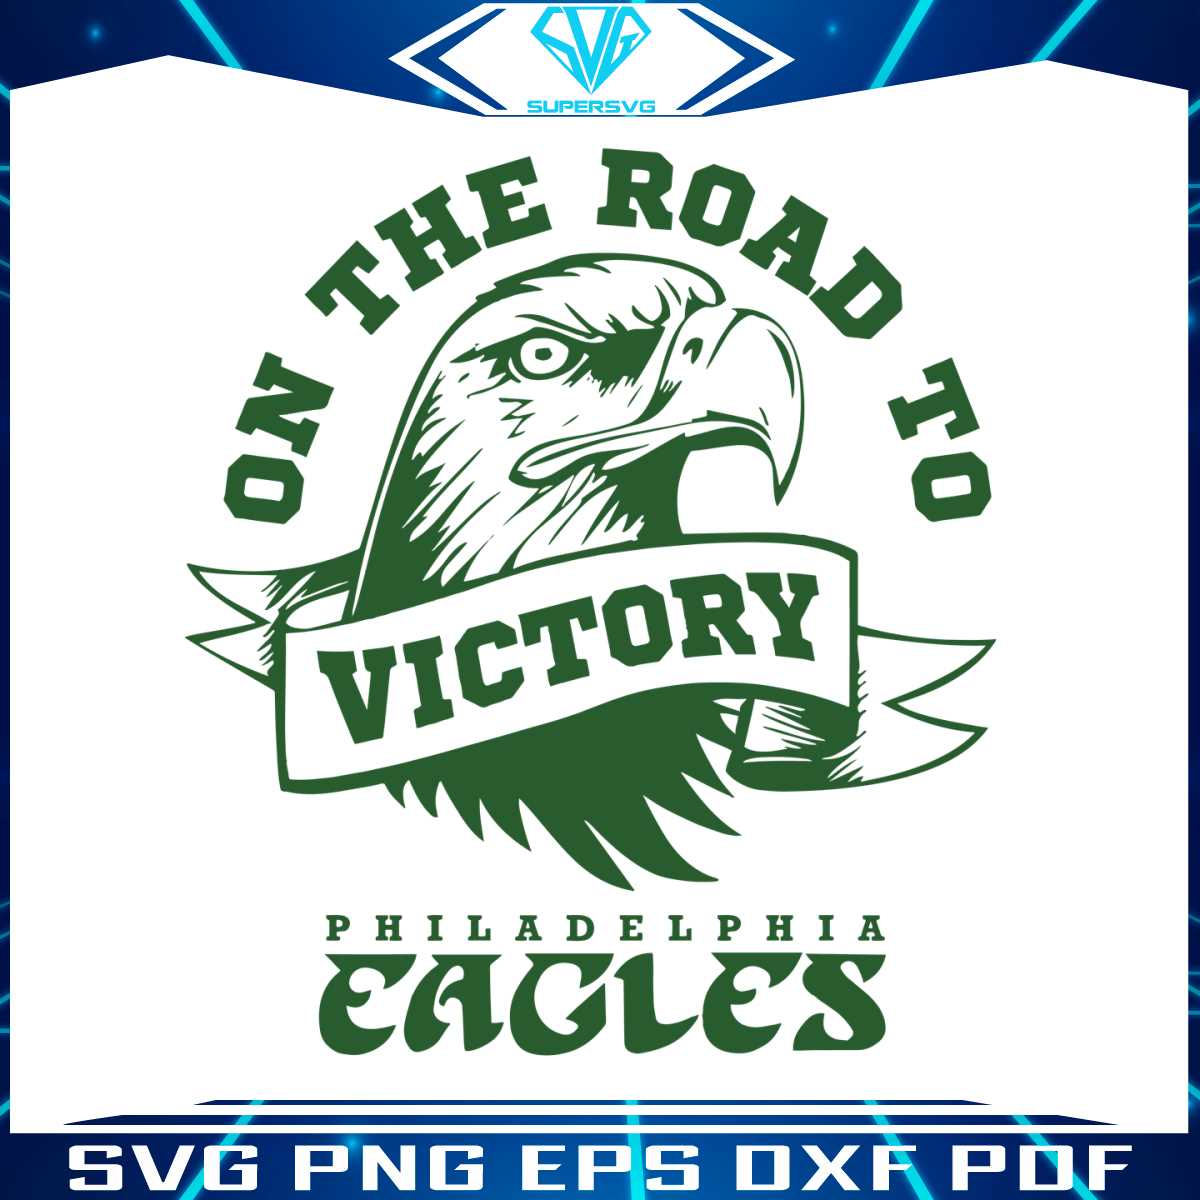 philadelphia-eagles-on-the-road-to-victory-svg-file-for-cricut